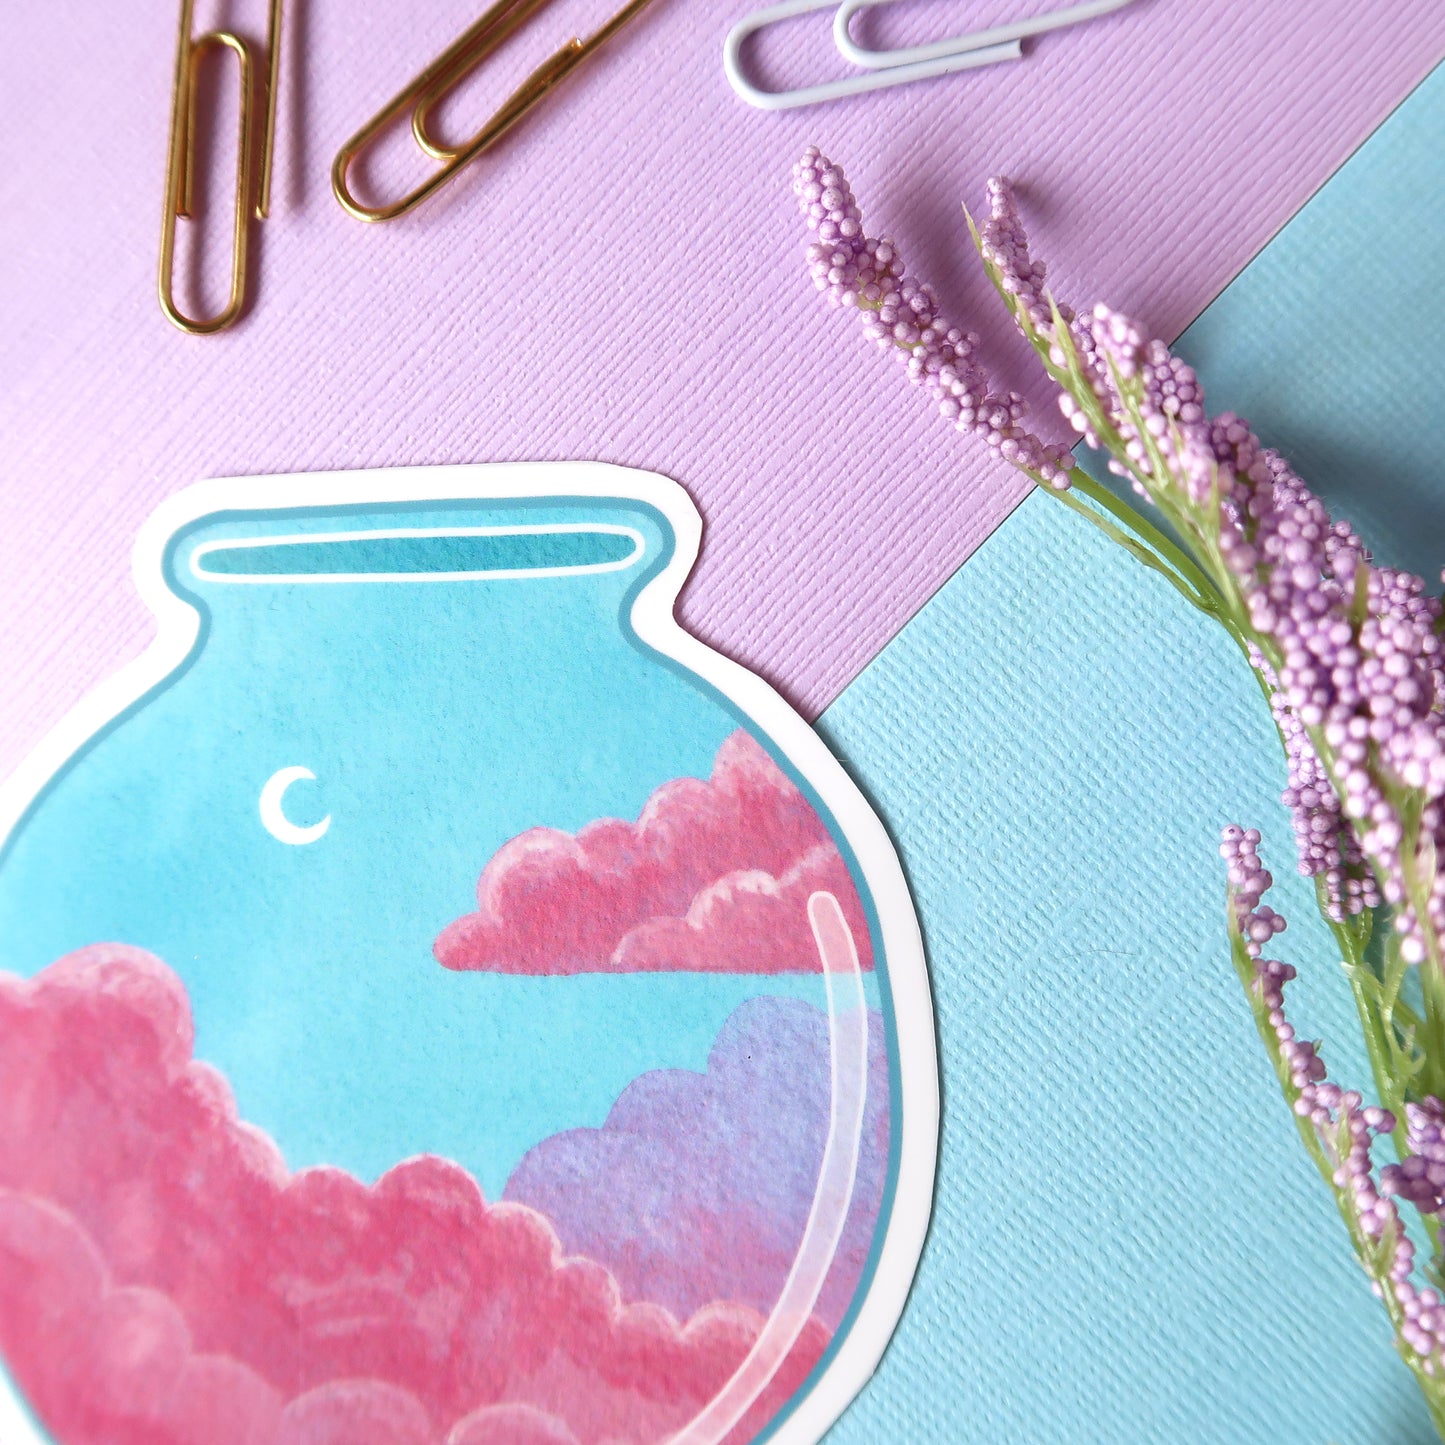 Cotton Candy Clouds and Moon Sky Jar Glossy Vinyl Die Cut Sticker